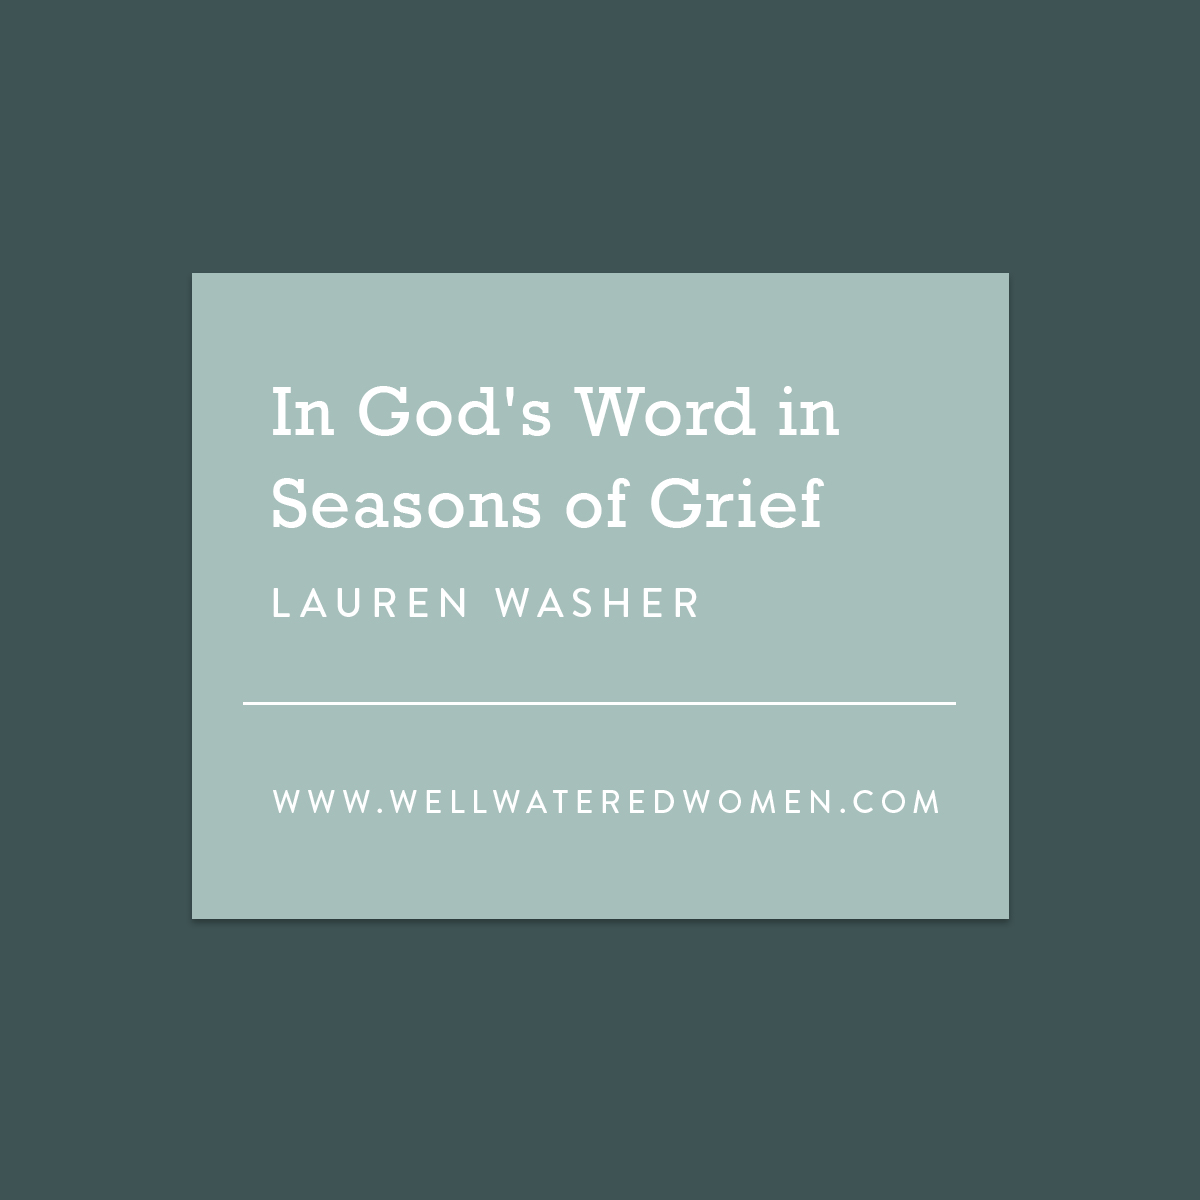 In God's Word In Seasons of Grief - an Article from Well-Watered Women